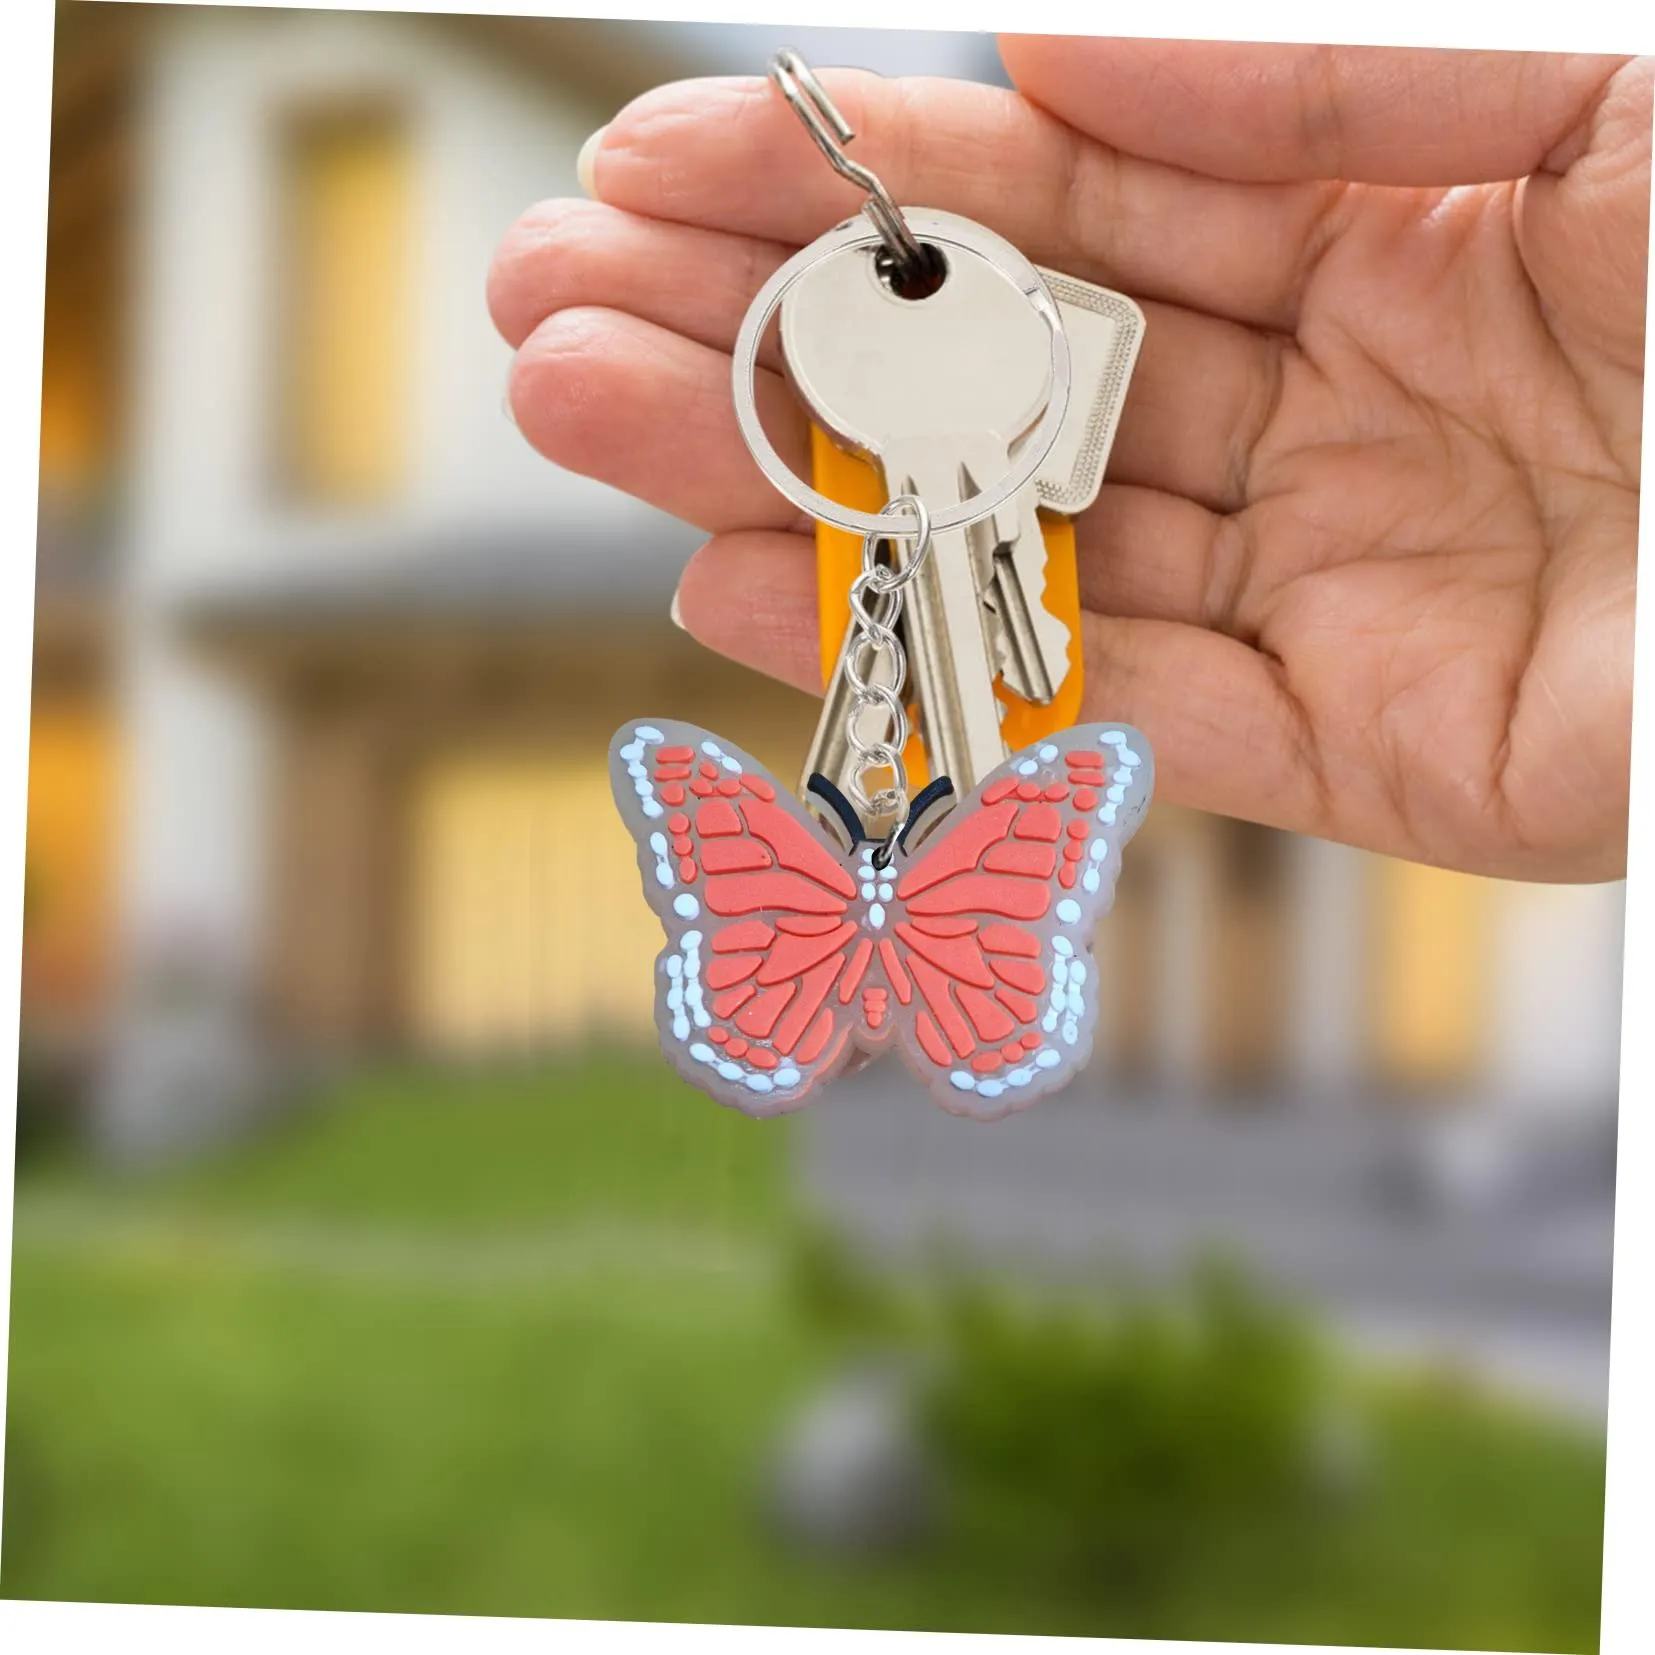 fluorescent butterfly 6 keychain keychains party favors keyrings for bags men keyring suitable schoolbag school backpack couple key chains women classroom prizes